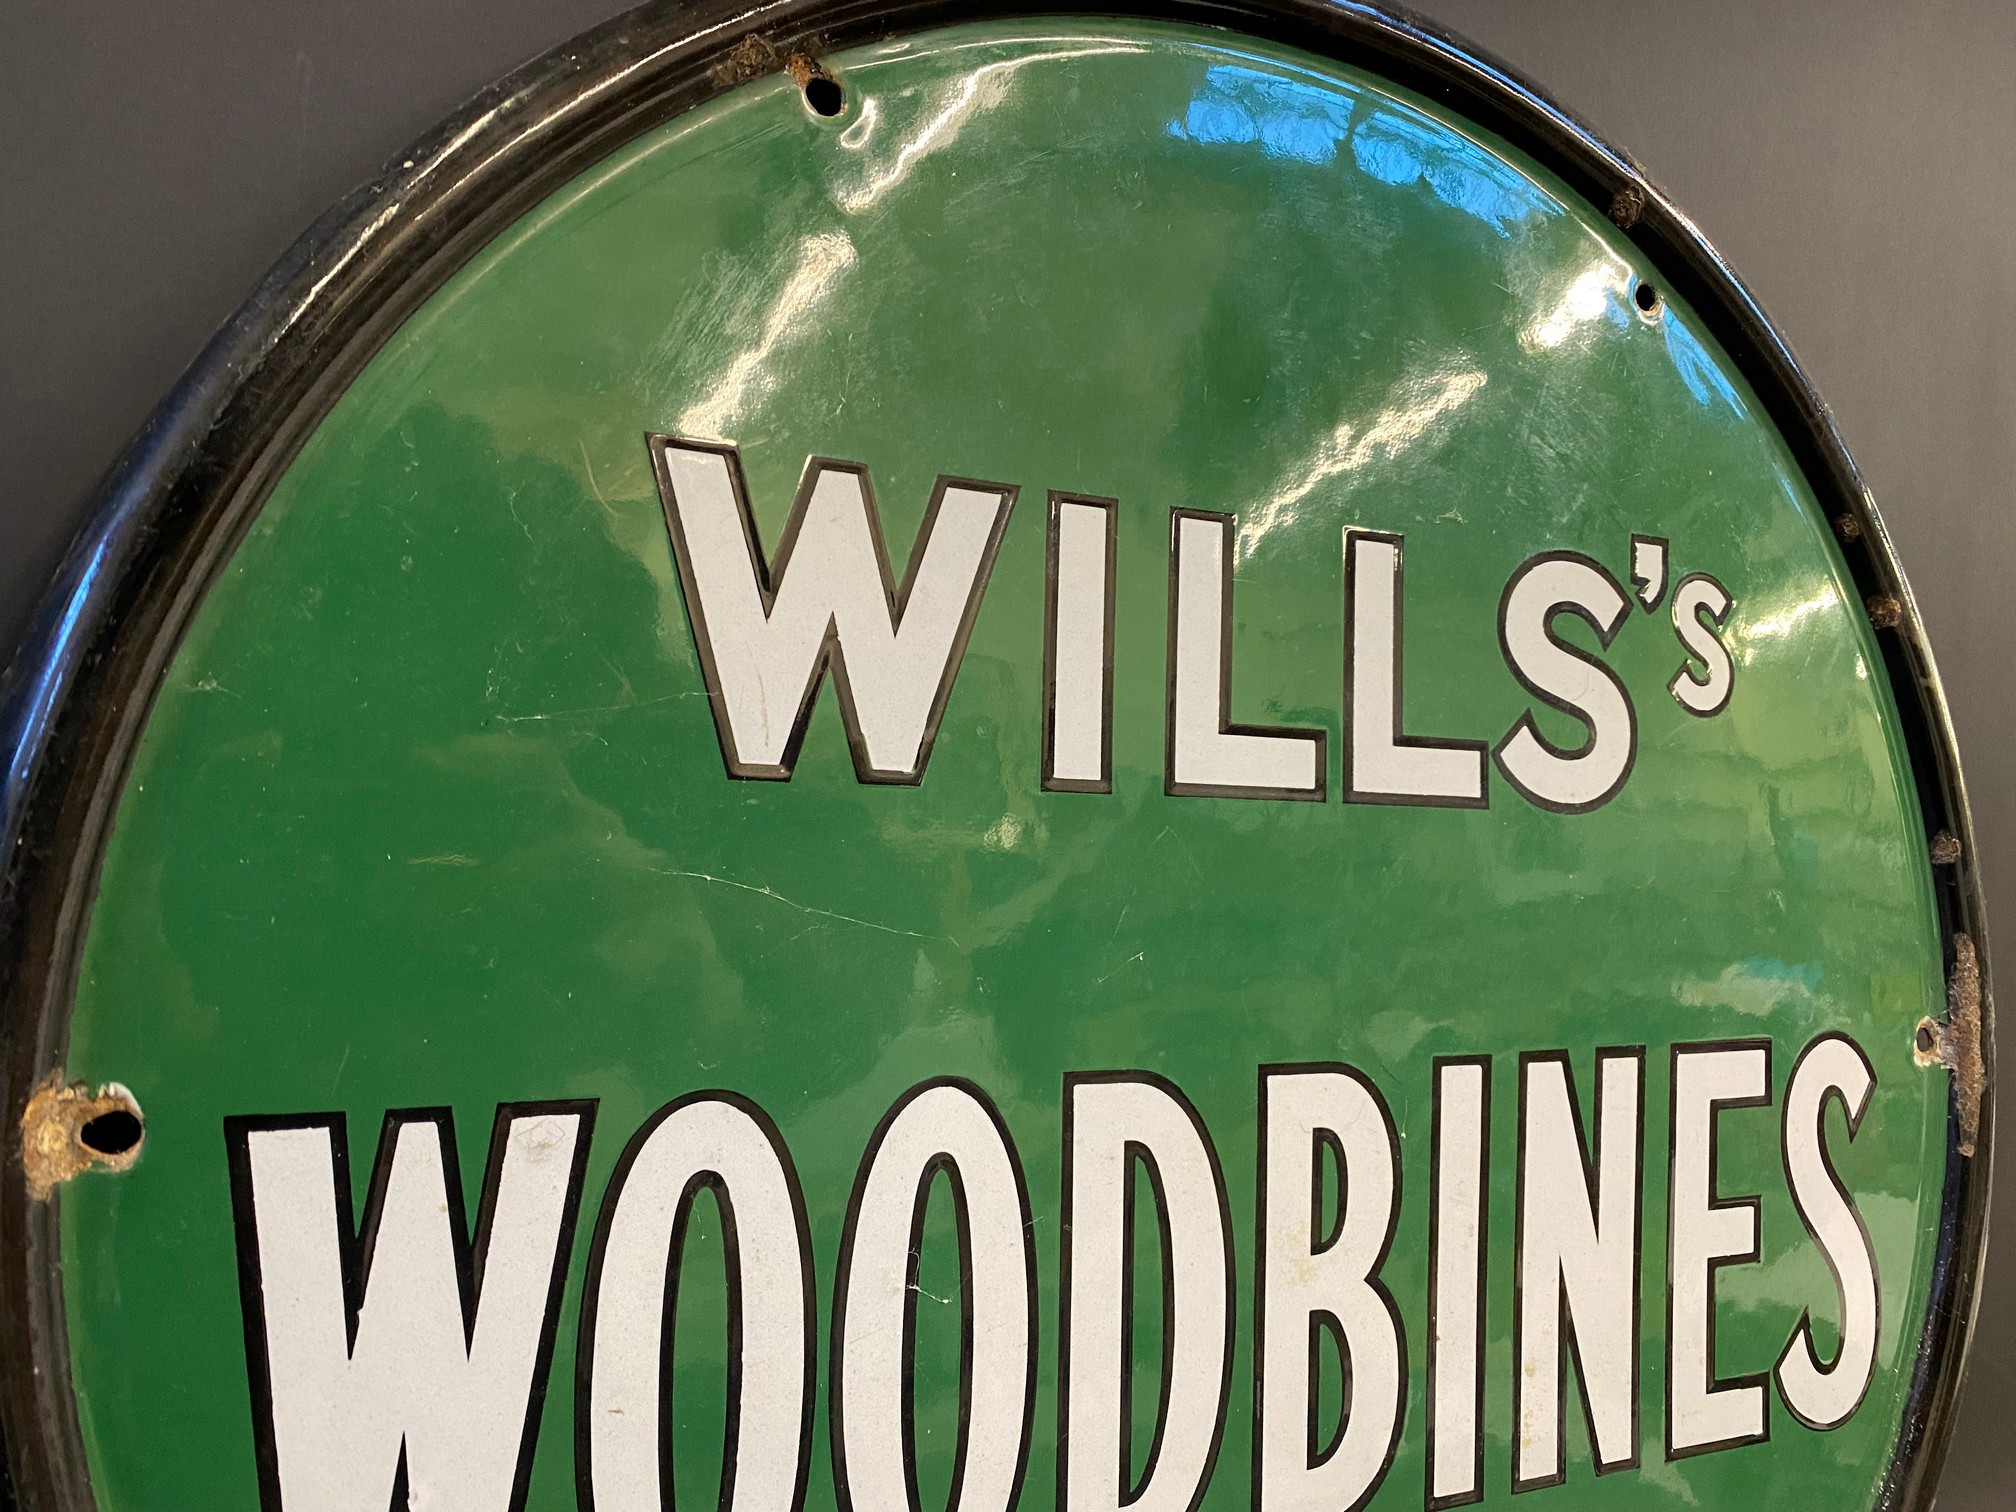 A Wills's Woodbines circular enamel sign in good condition, with a nice gloss, 18" diameter. - Image 2 of 4